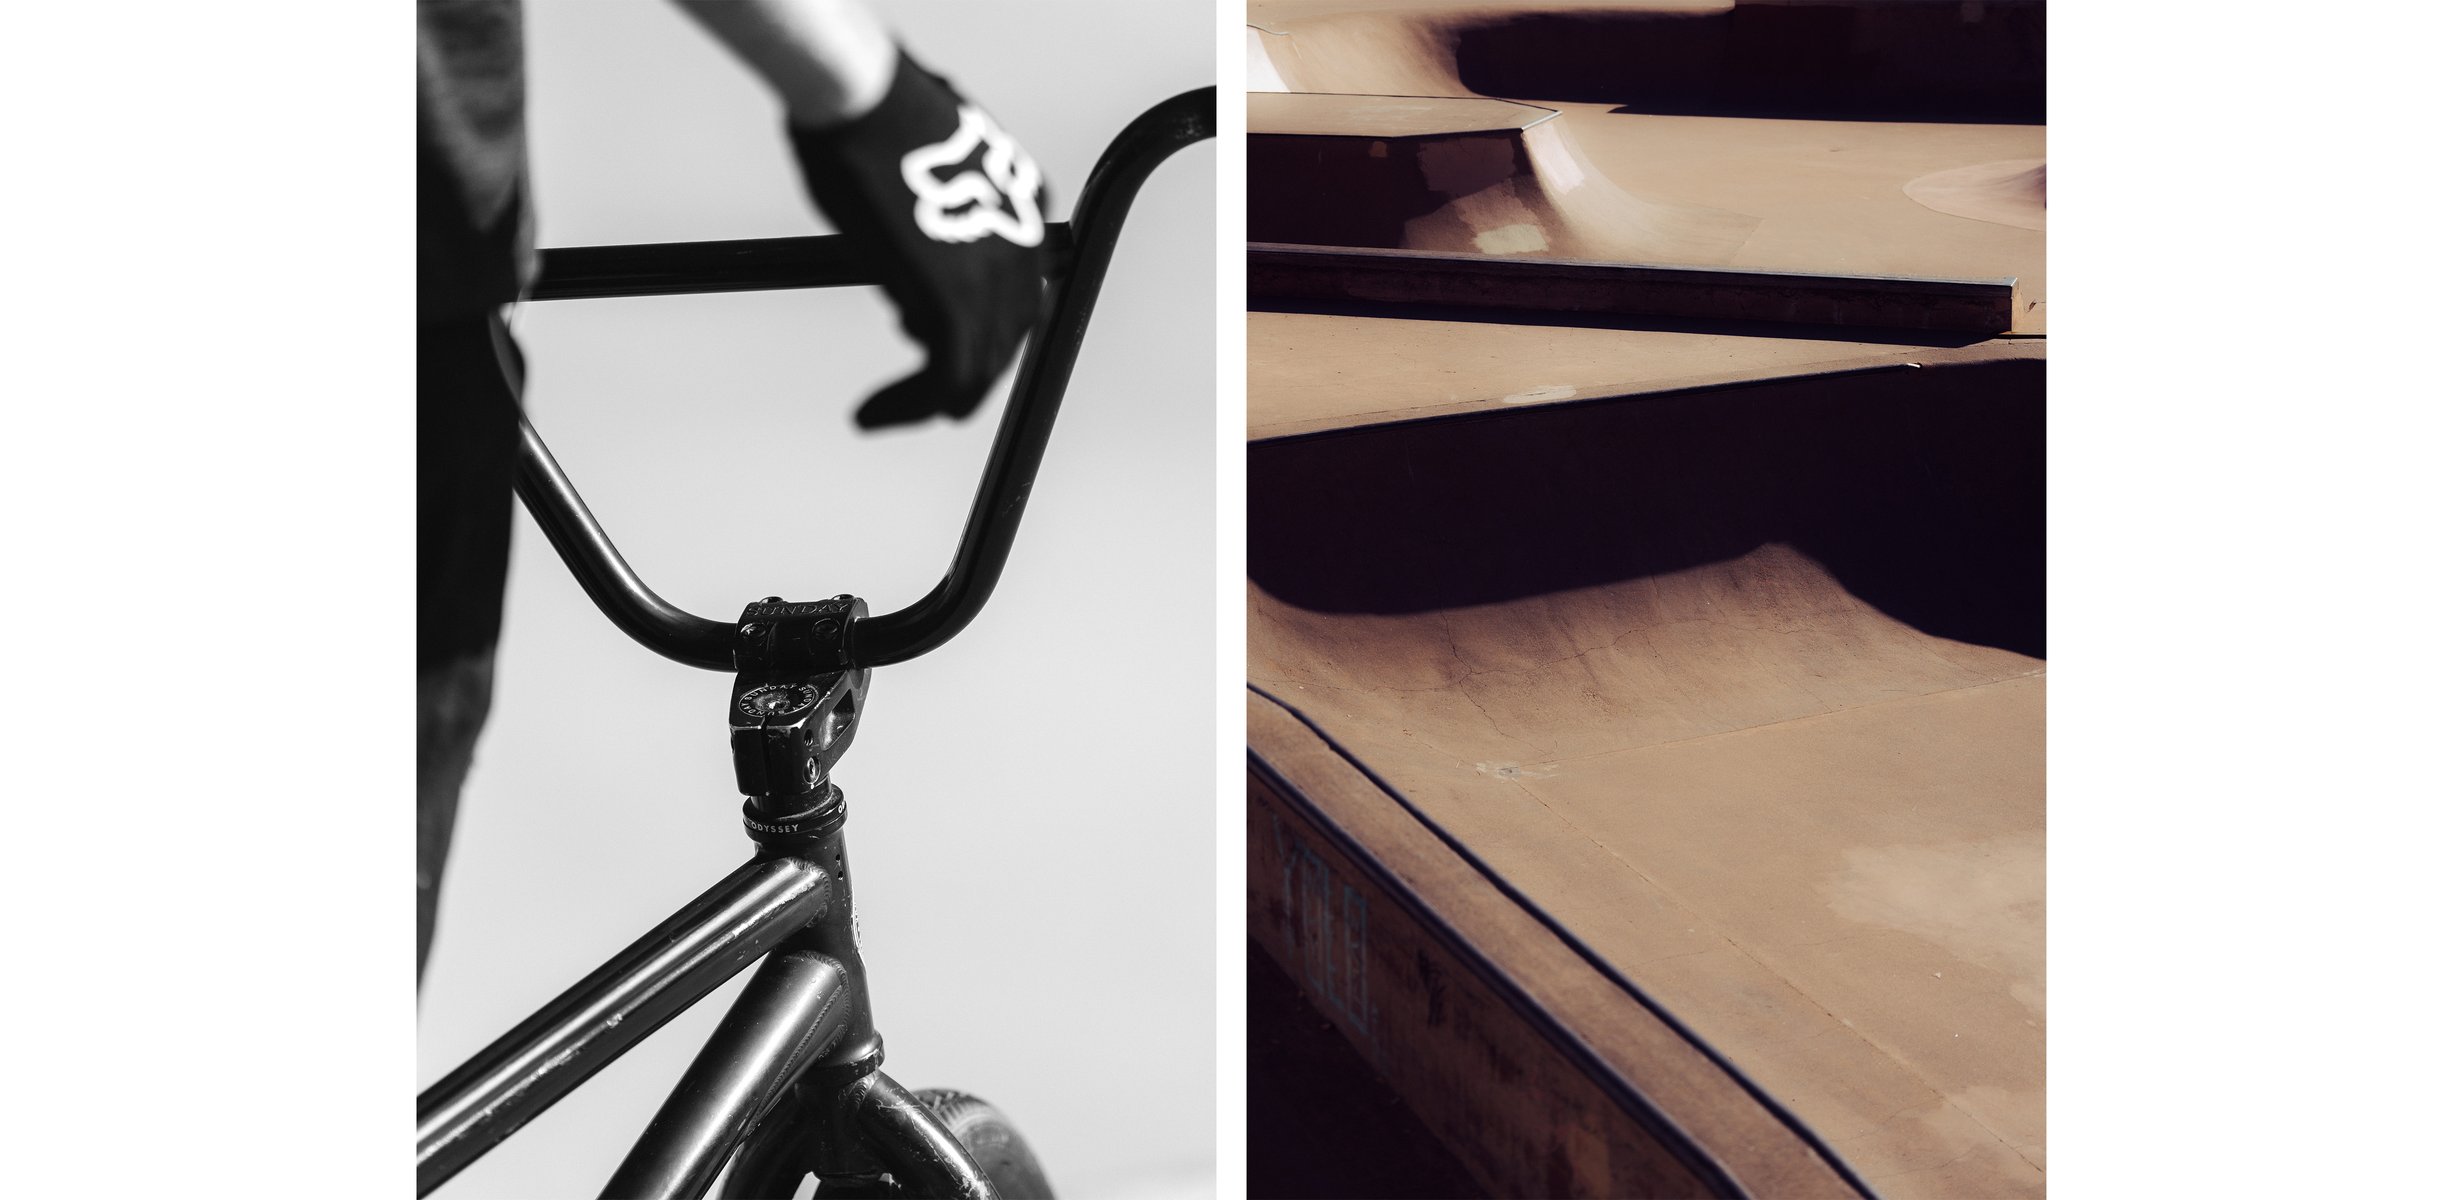  Diptych:

Left image: a black and white image of the handlebars of a bmx bike with a gloved hand balancing it upright.

Right image: an abstract, shadowy image of the ramps in a skate park. by Sydney SG